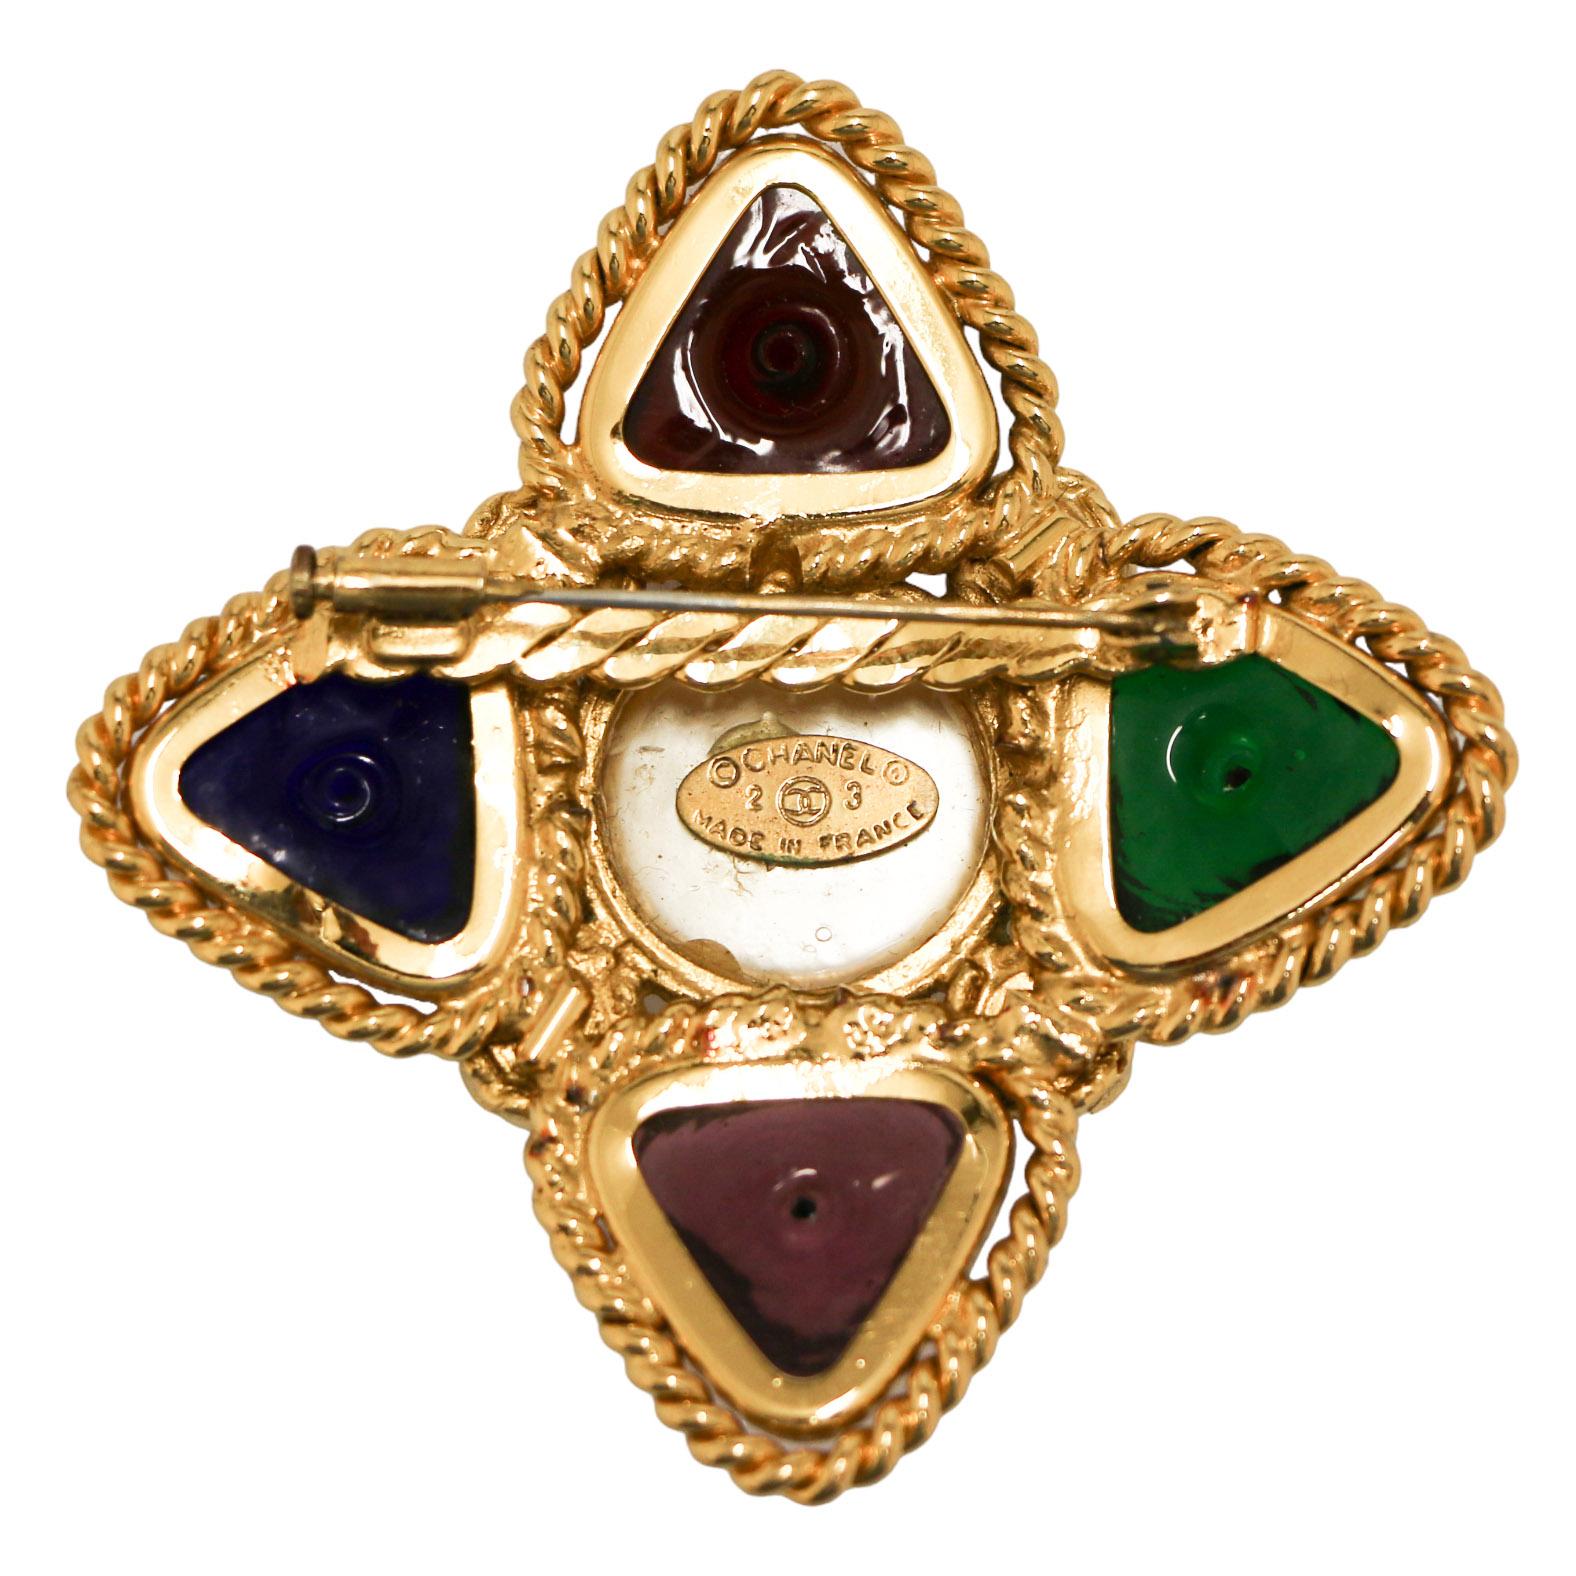 Incredible large Chanel brooch from 1984 in glass paste

Condition: very good
Made in France
Materials: golden metal, glass paste, pearl, crystals
Colors: golden, green, red, blue, purple
Dimensions: 7 x 7 cm
Stamp: yes
Year: 1984
Details: four